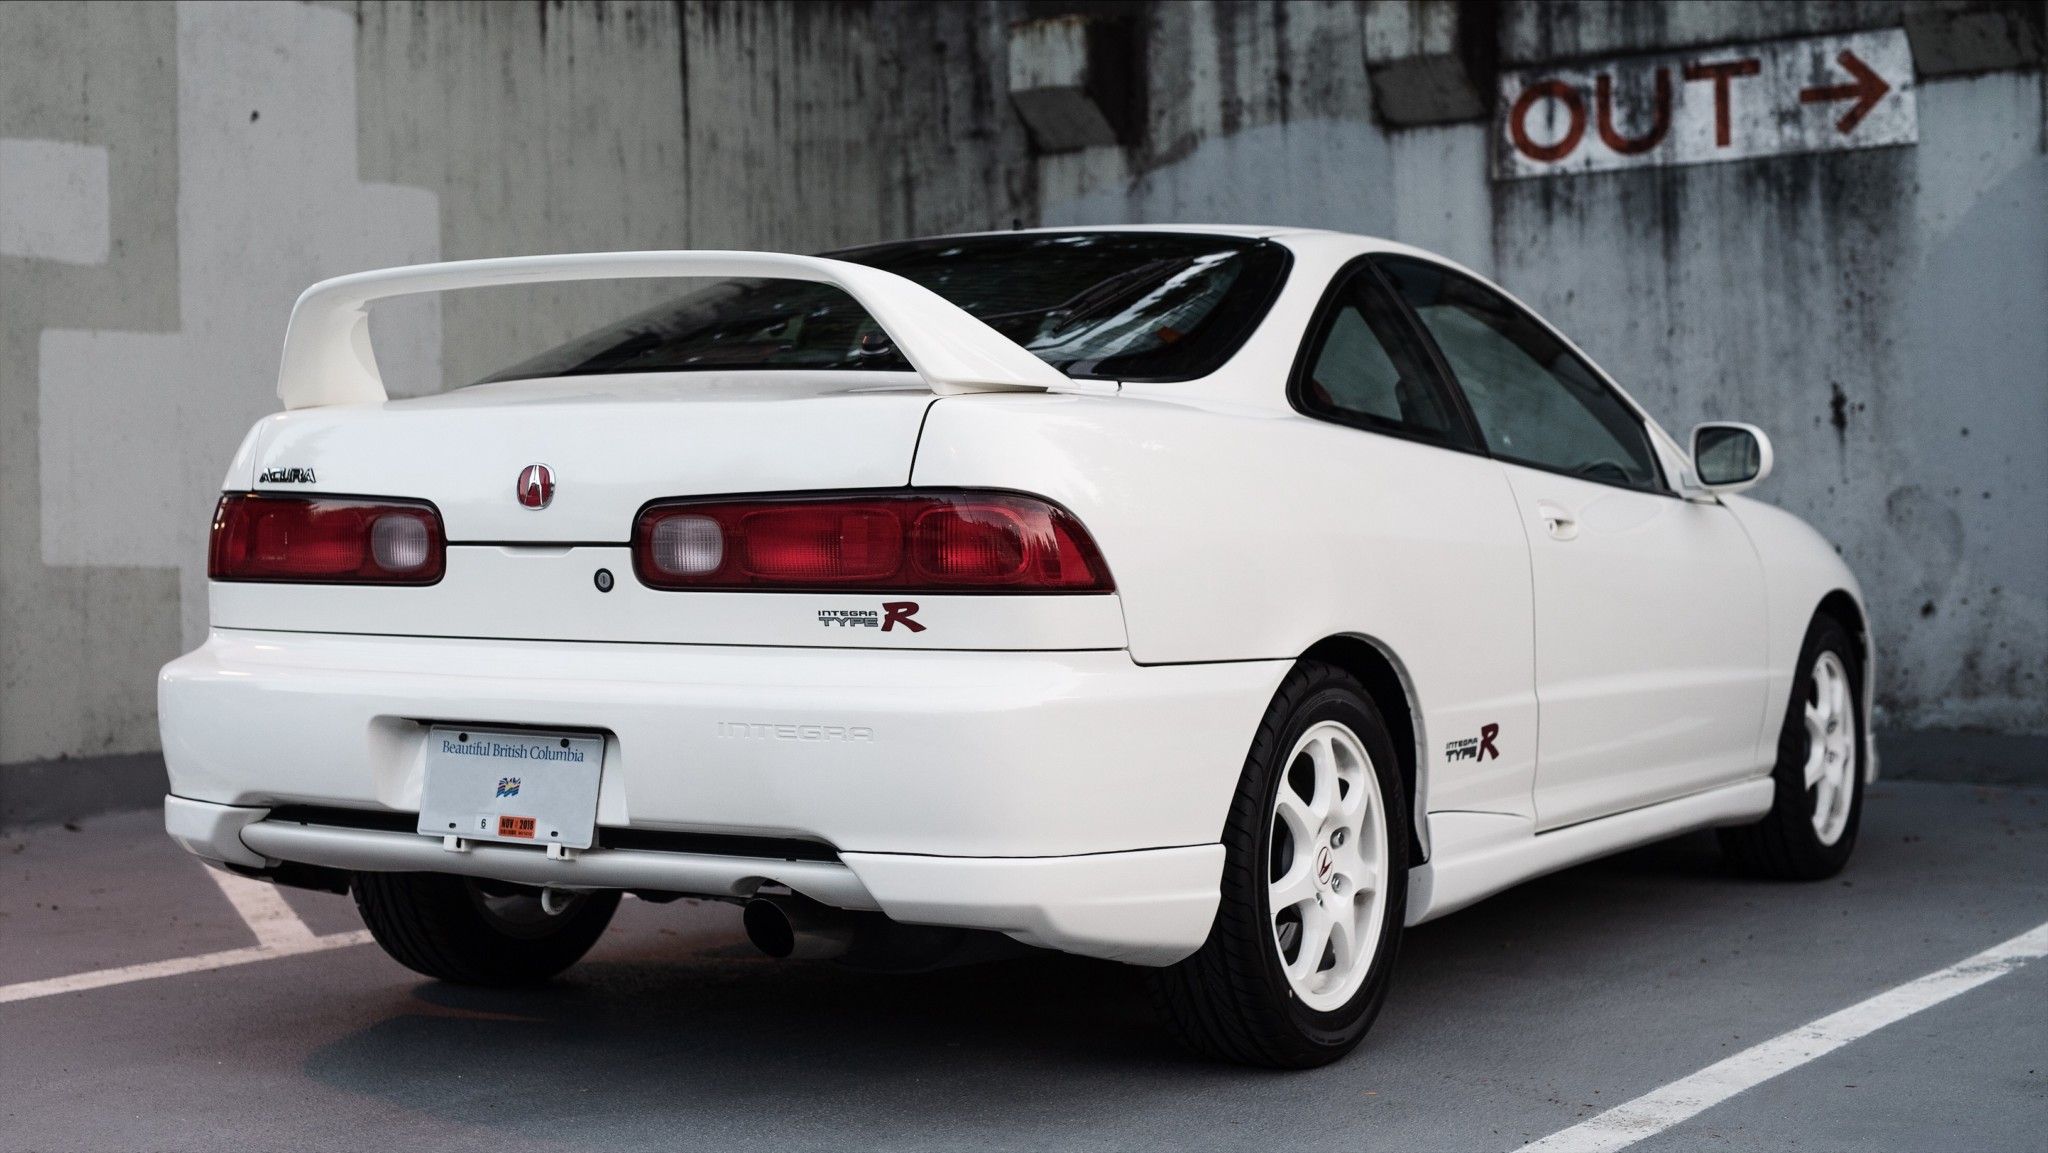 Acura Integra Type R in a parking